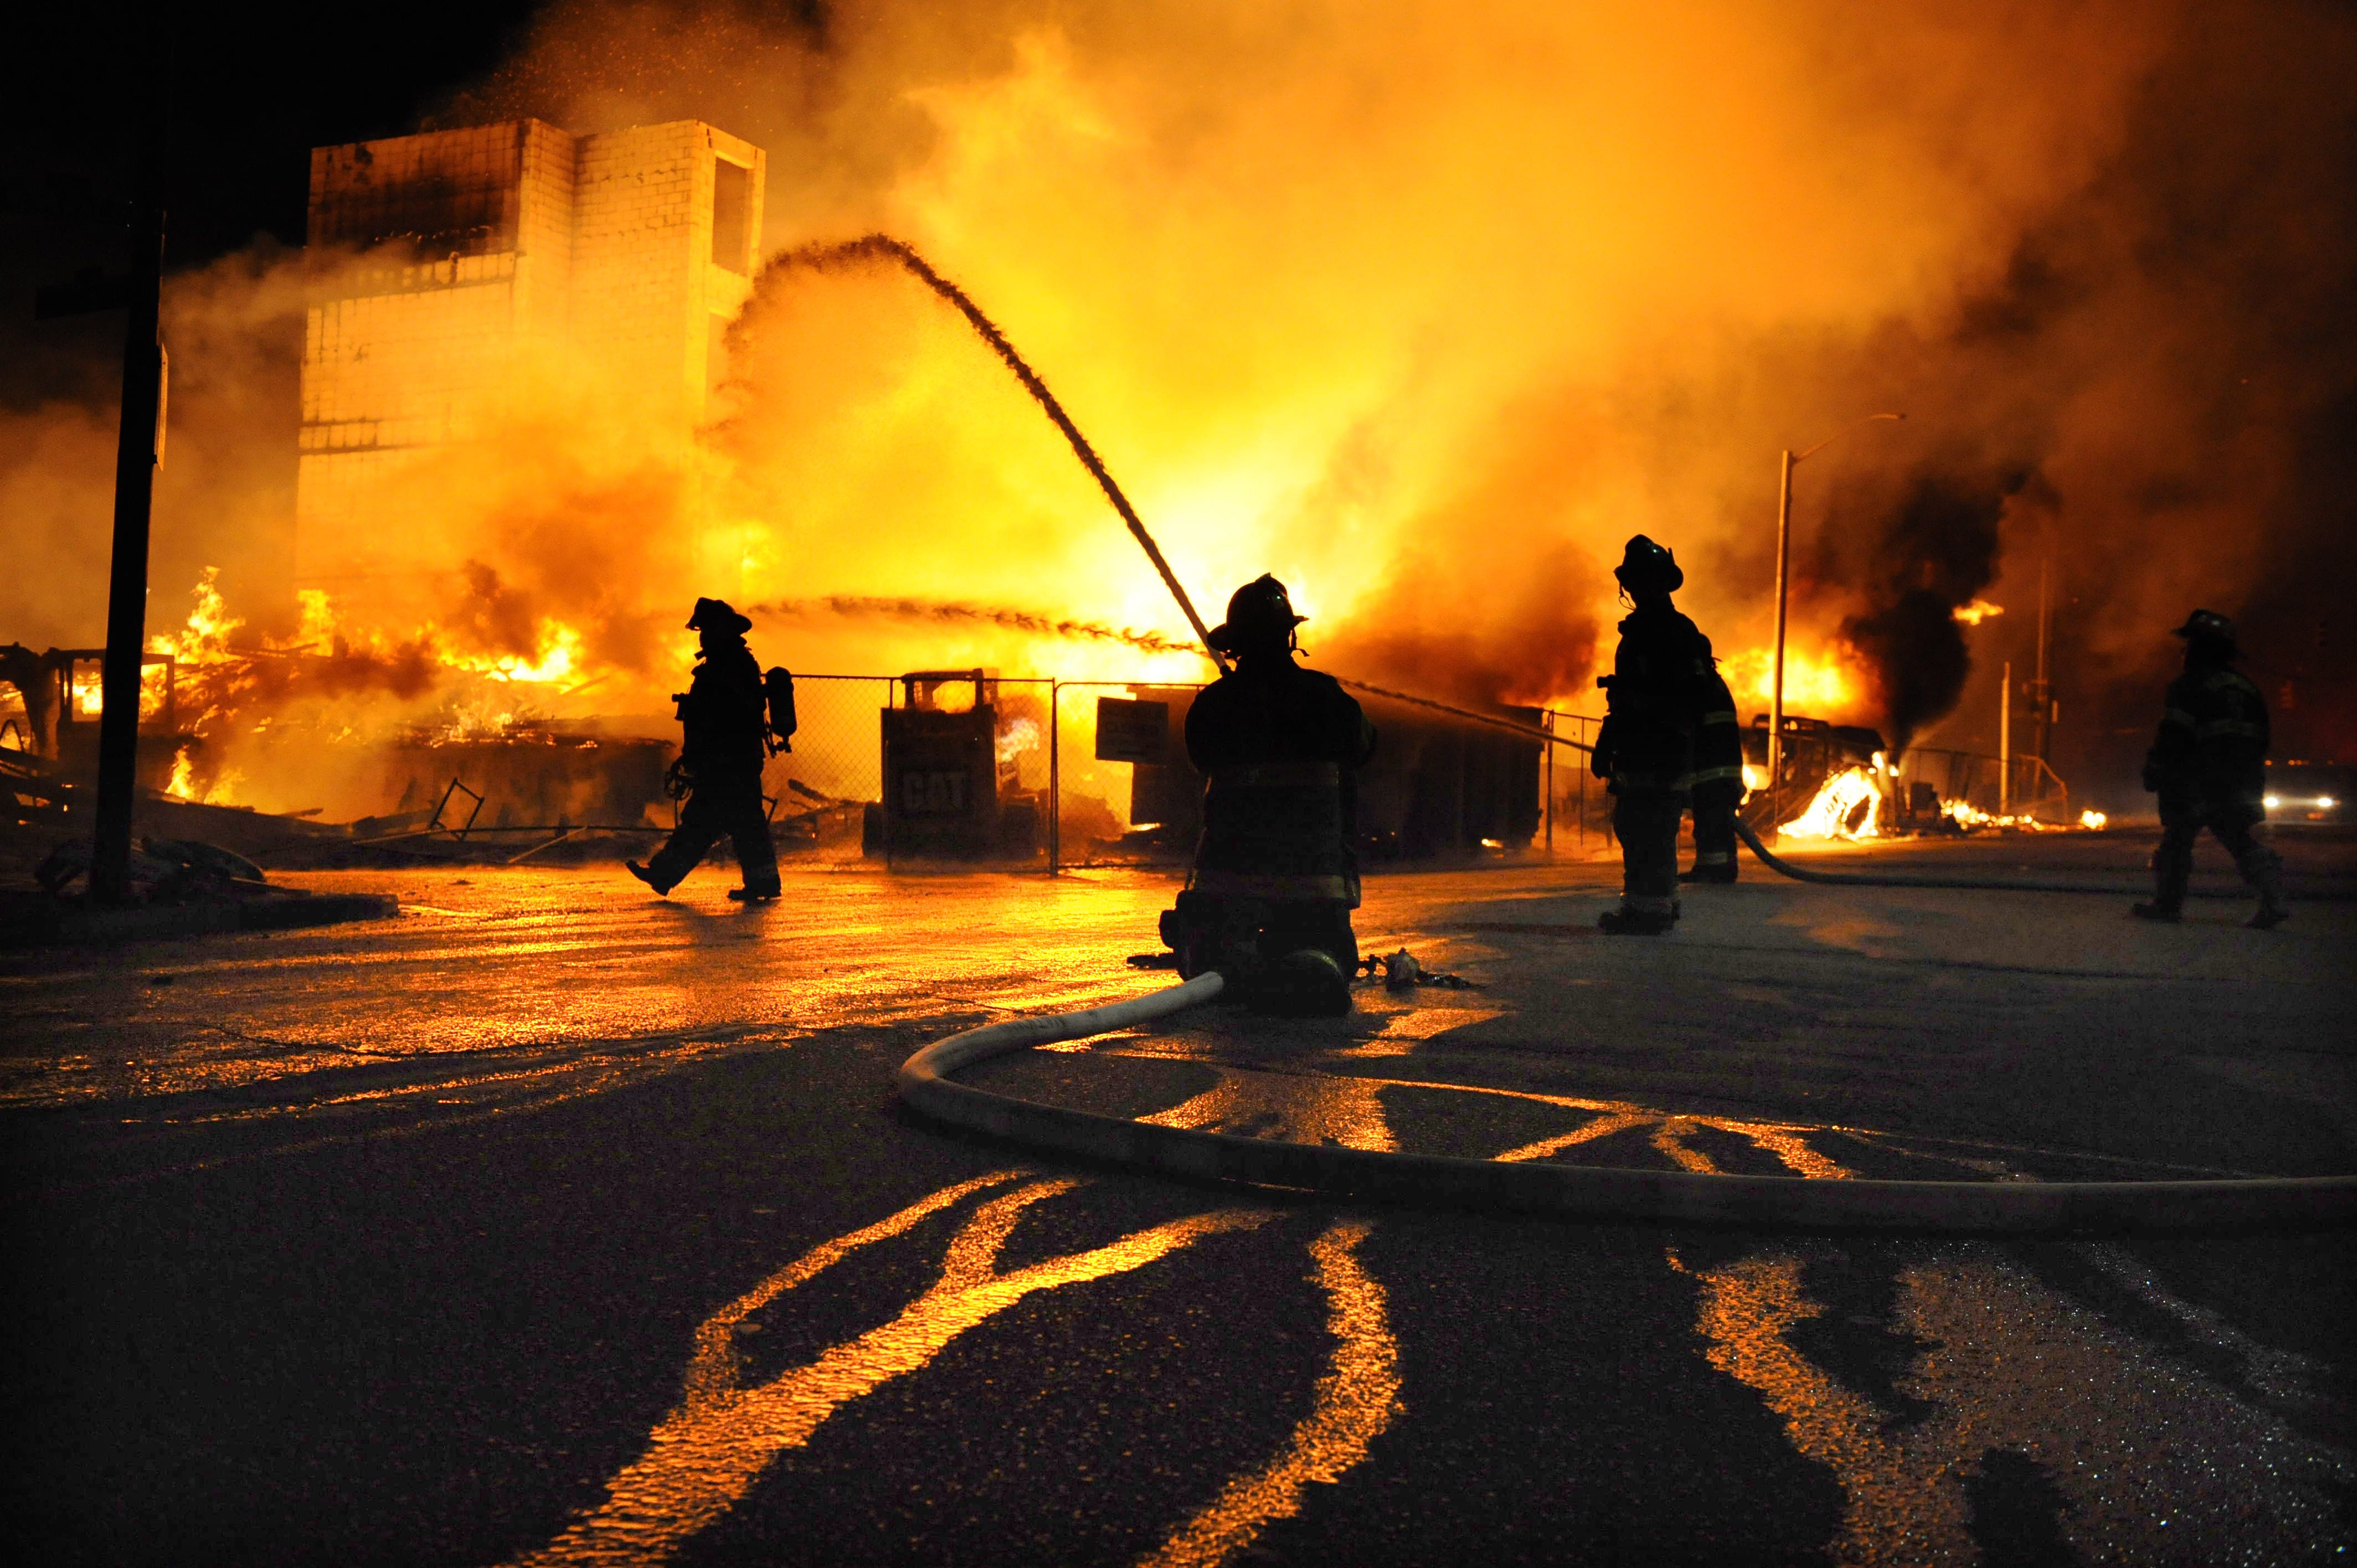 State of emergency declared as Baltimore burns